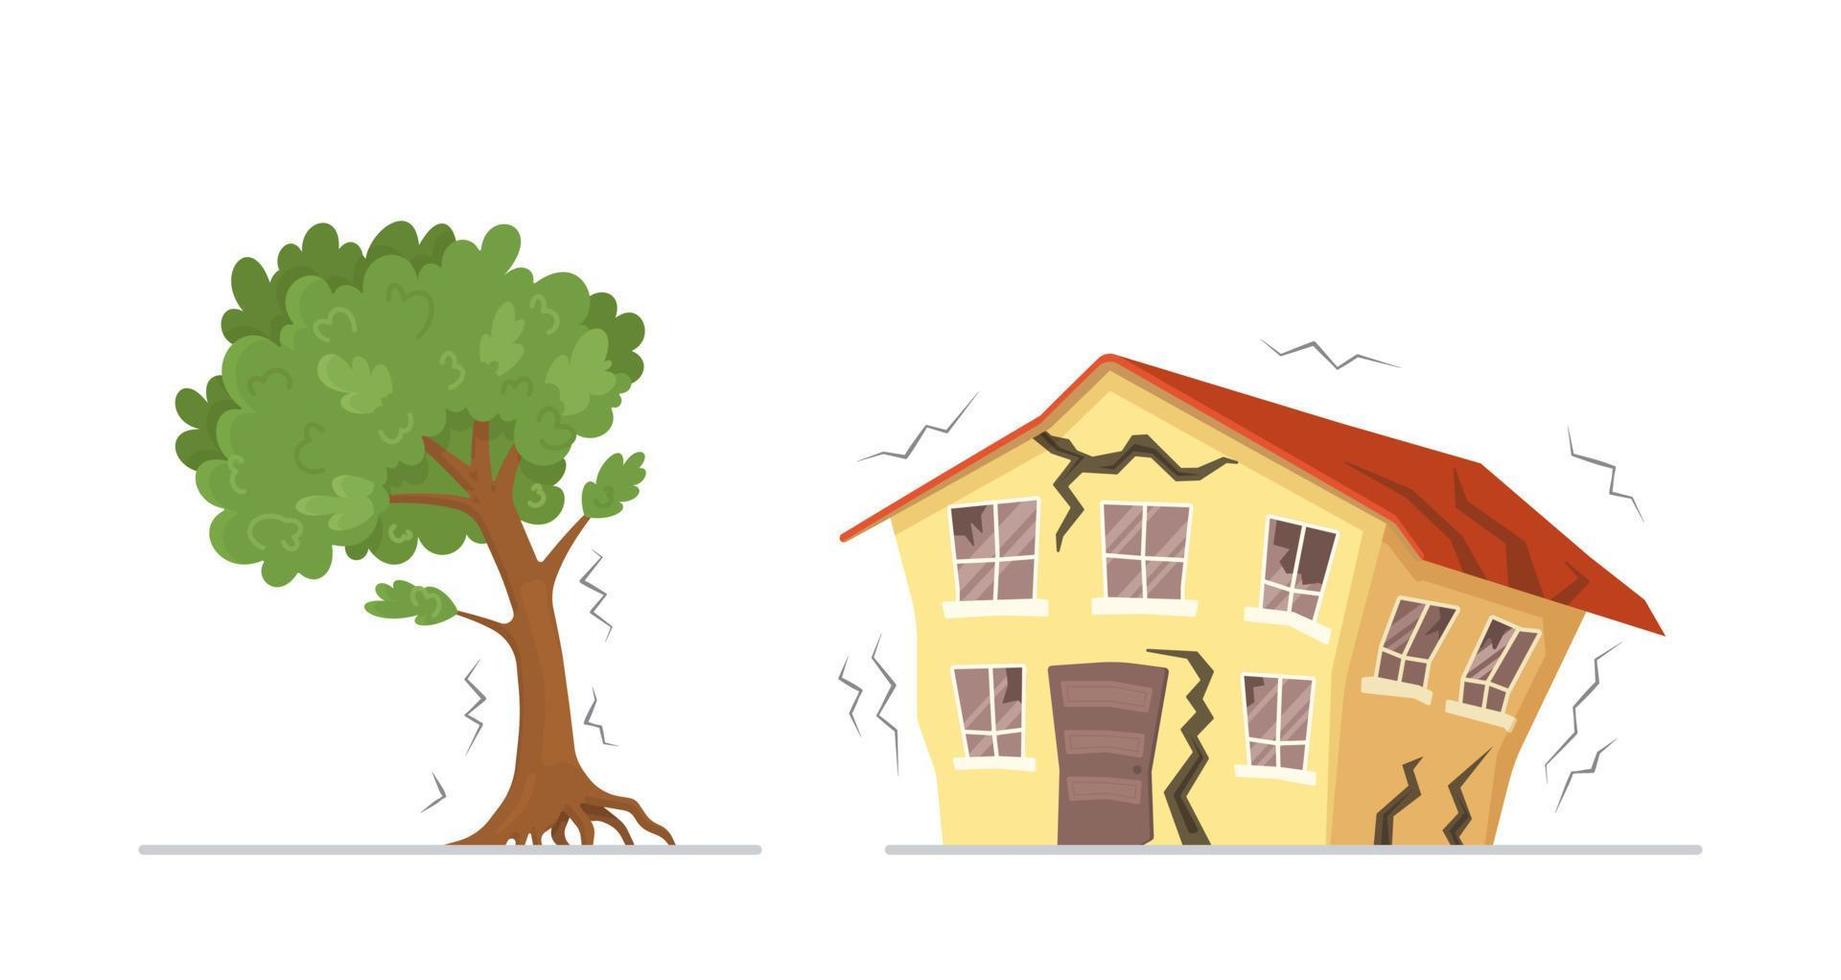 Vector illustration of the earthquake. Broken yellow house and broken tree from earthquake isolated on white background.